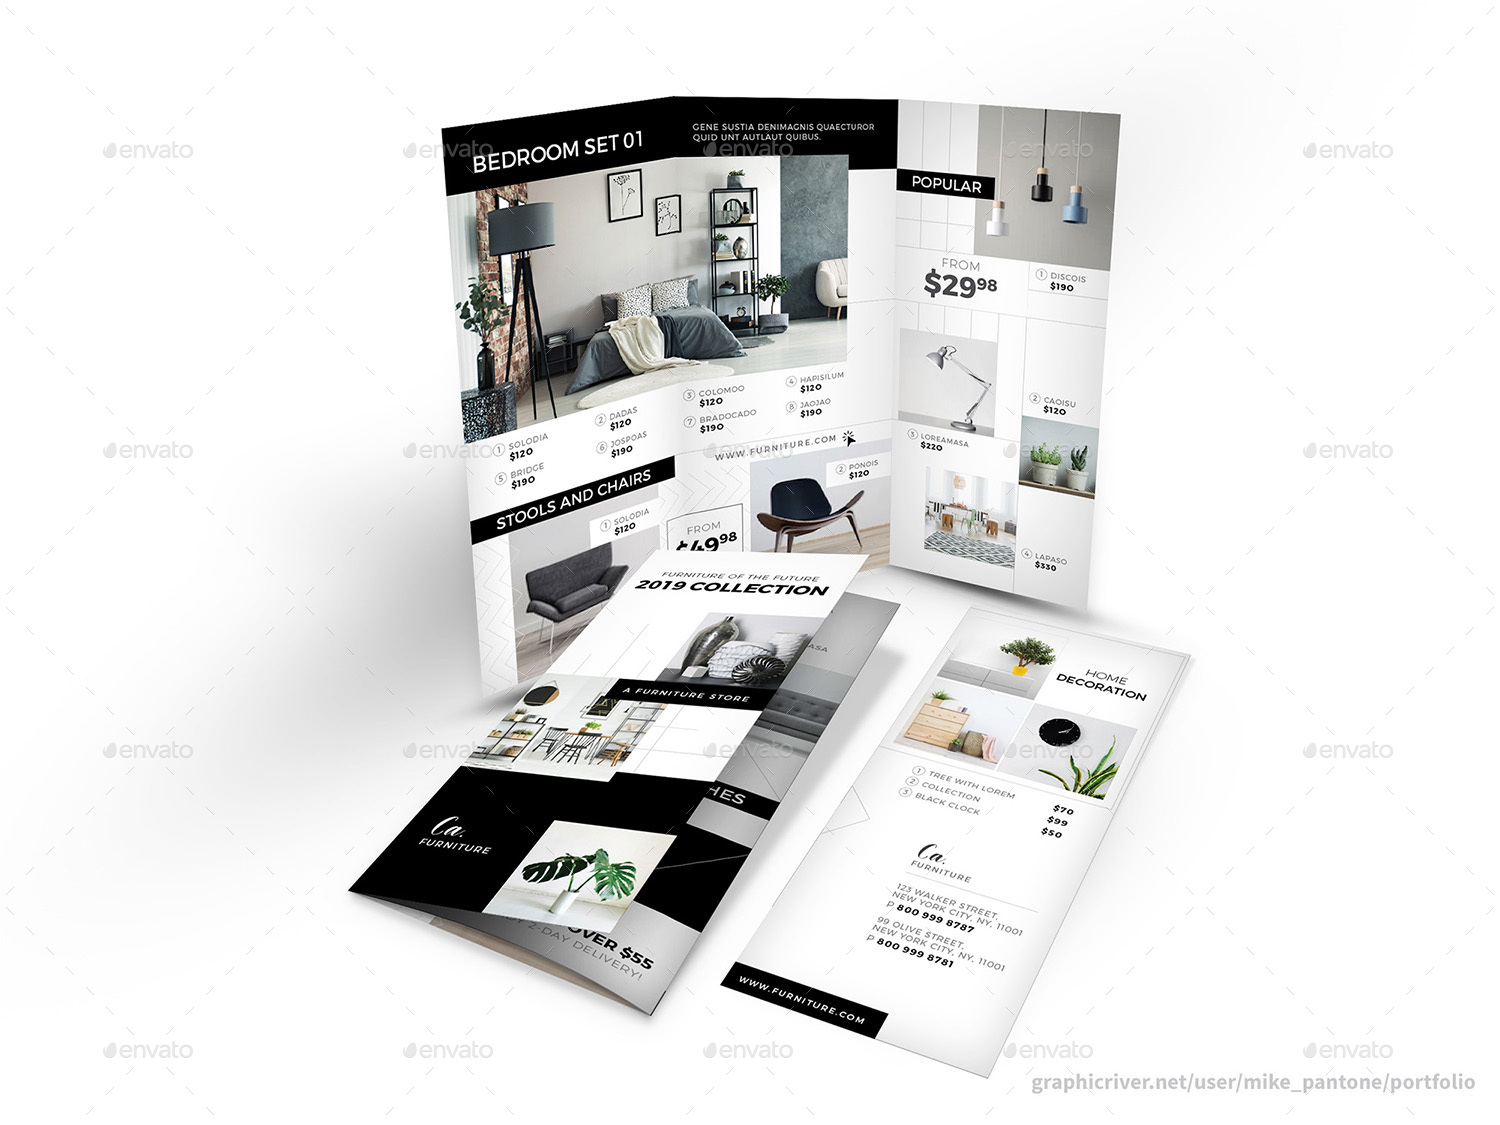 Furniture Store Trifold Brochure 4 By Mike Pantone Graphicriver